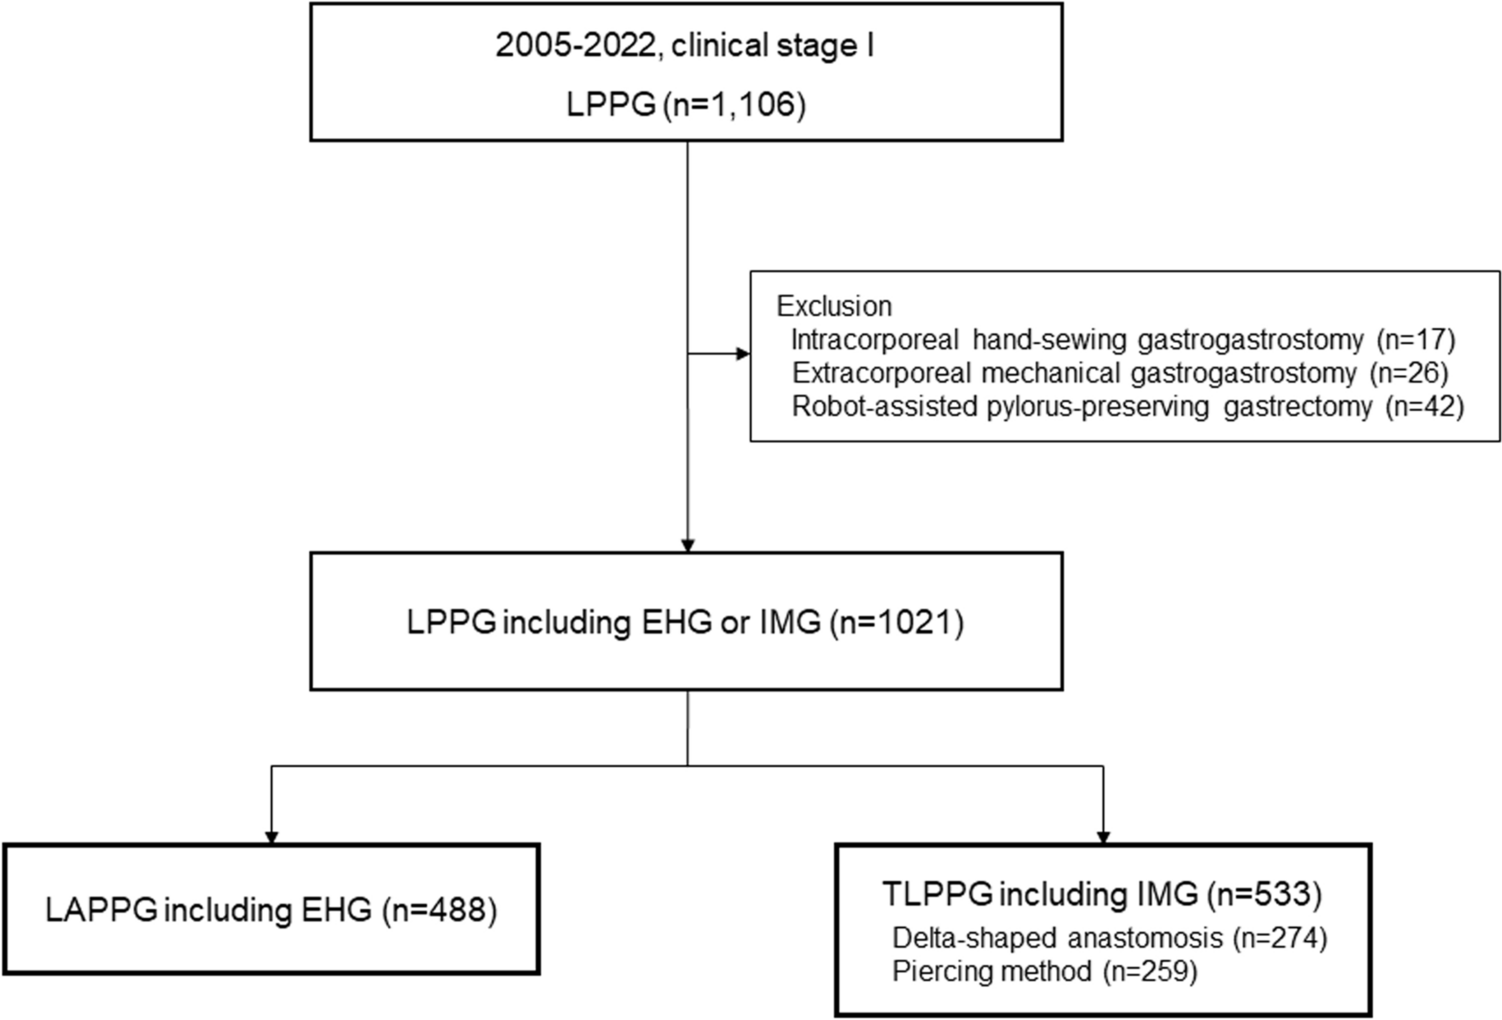 Equal short-term outcomes of intracorporeal mechanical gastrogastrostomy in laparoscopic pylorus-preserving gastrectomy for cT1N0 gastric cancer in the middle stomach compared with the extracorporeal hand-sewing method